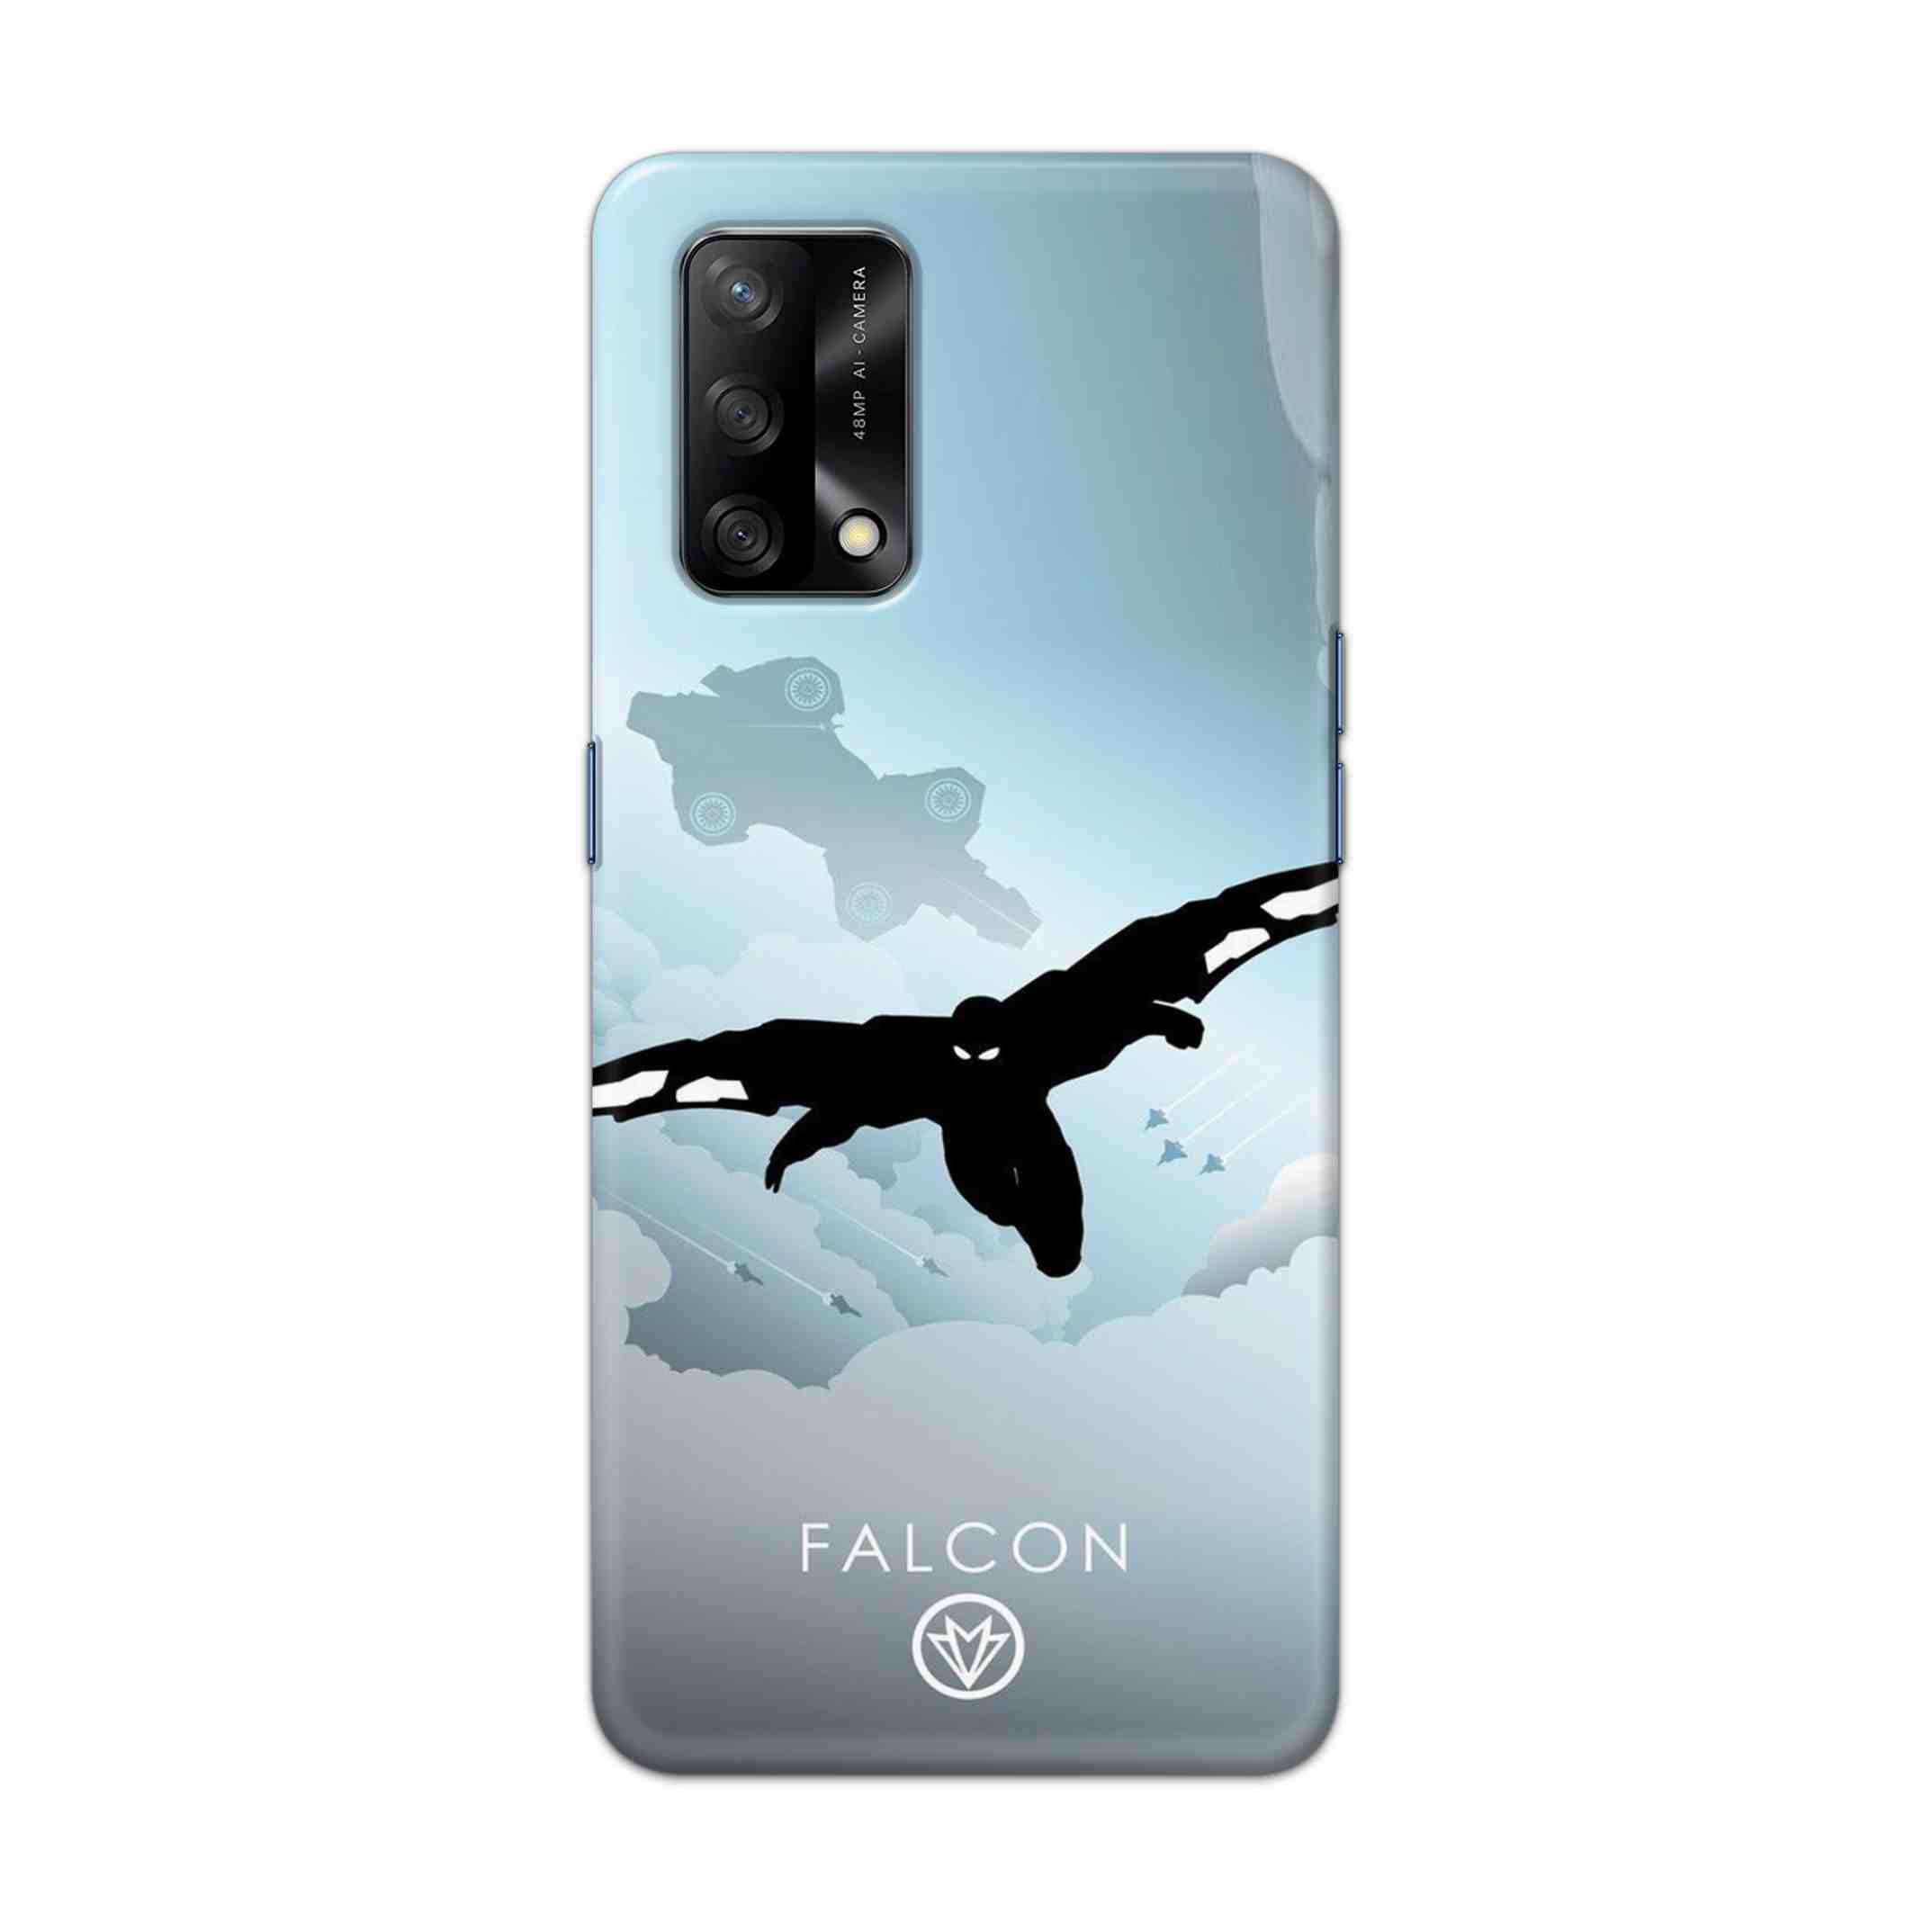 Buy Falcon Hard Back Mobile Phone Case Cover For Oppo F19 Online